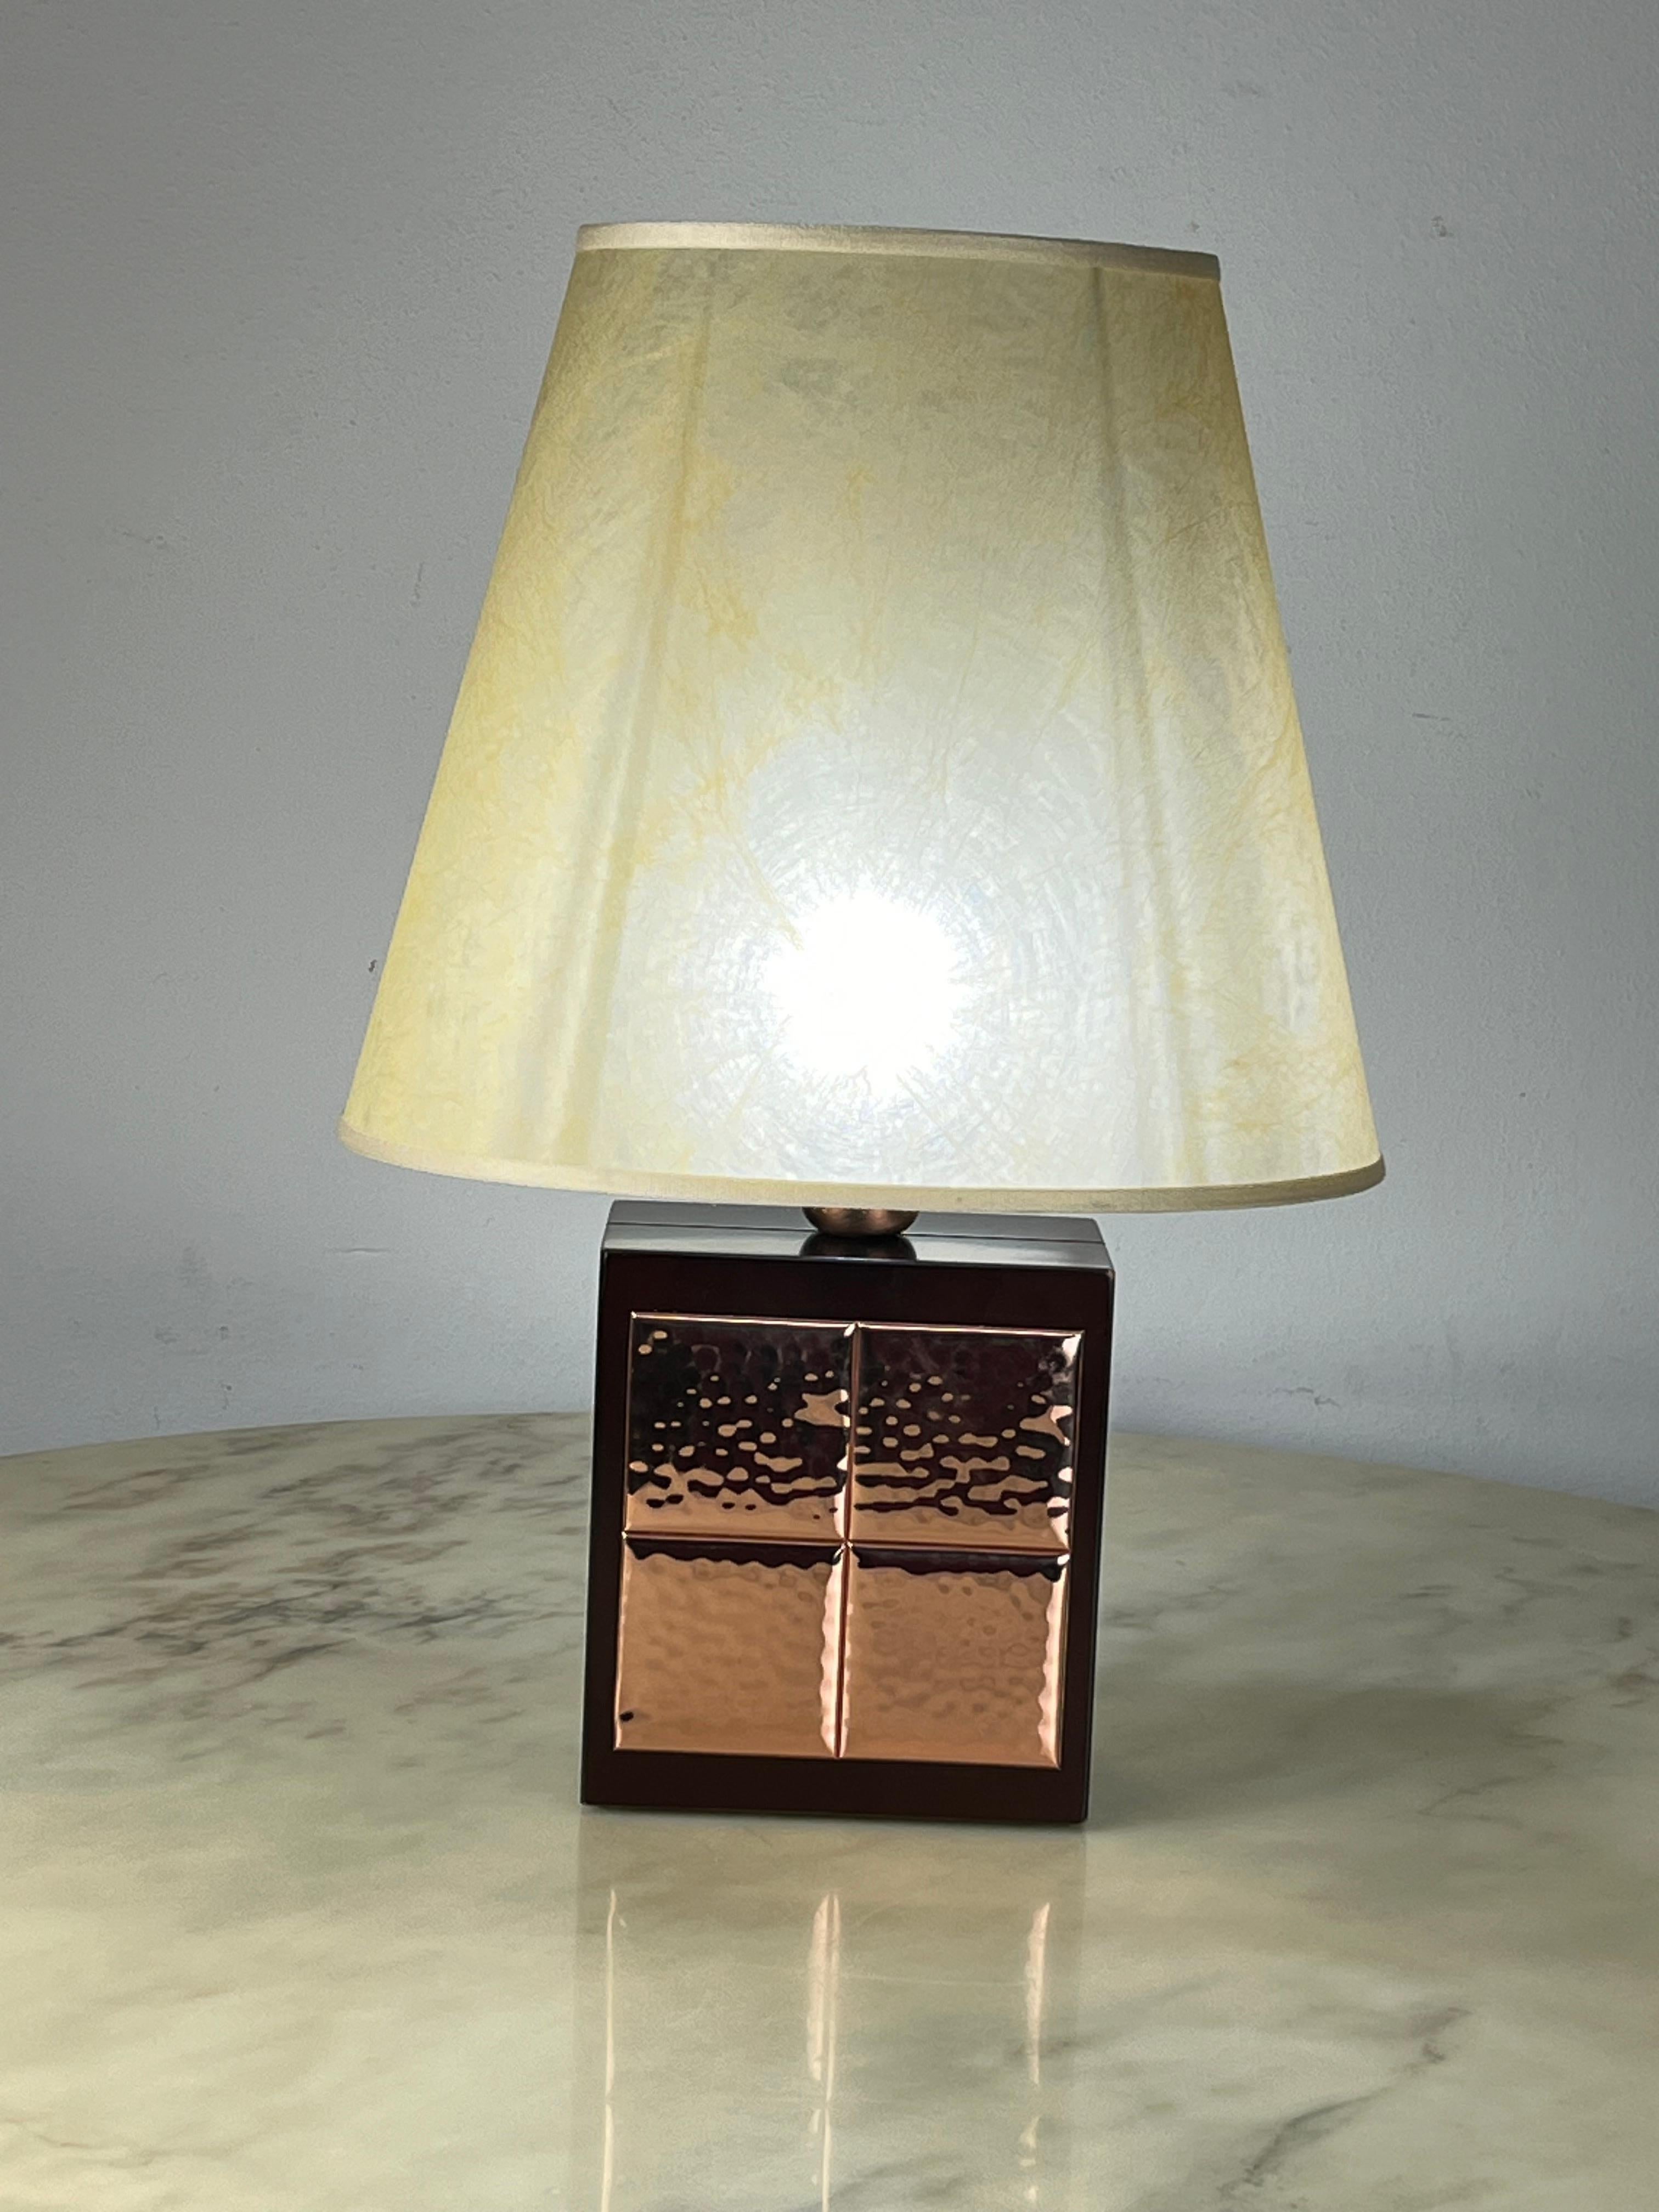 Italian Table Lamp in Walnut and Copper, 1990s For Sale 3